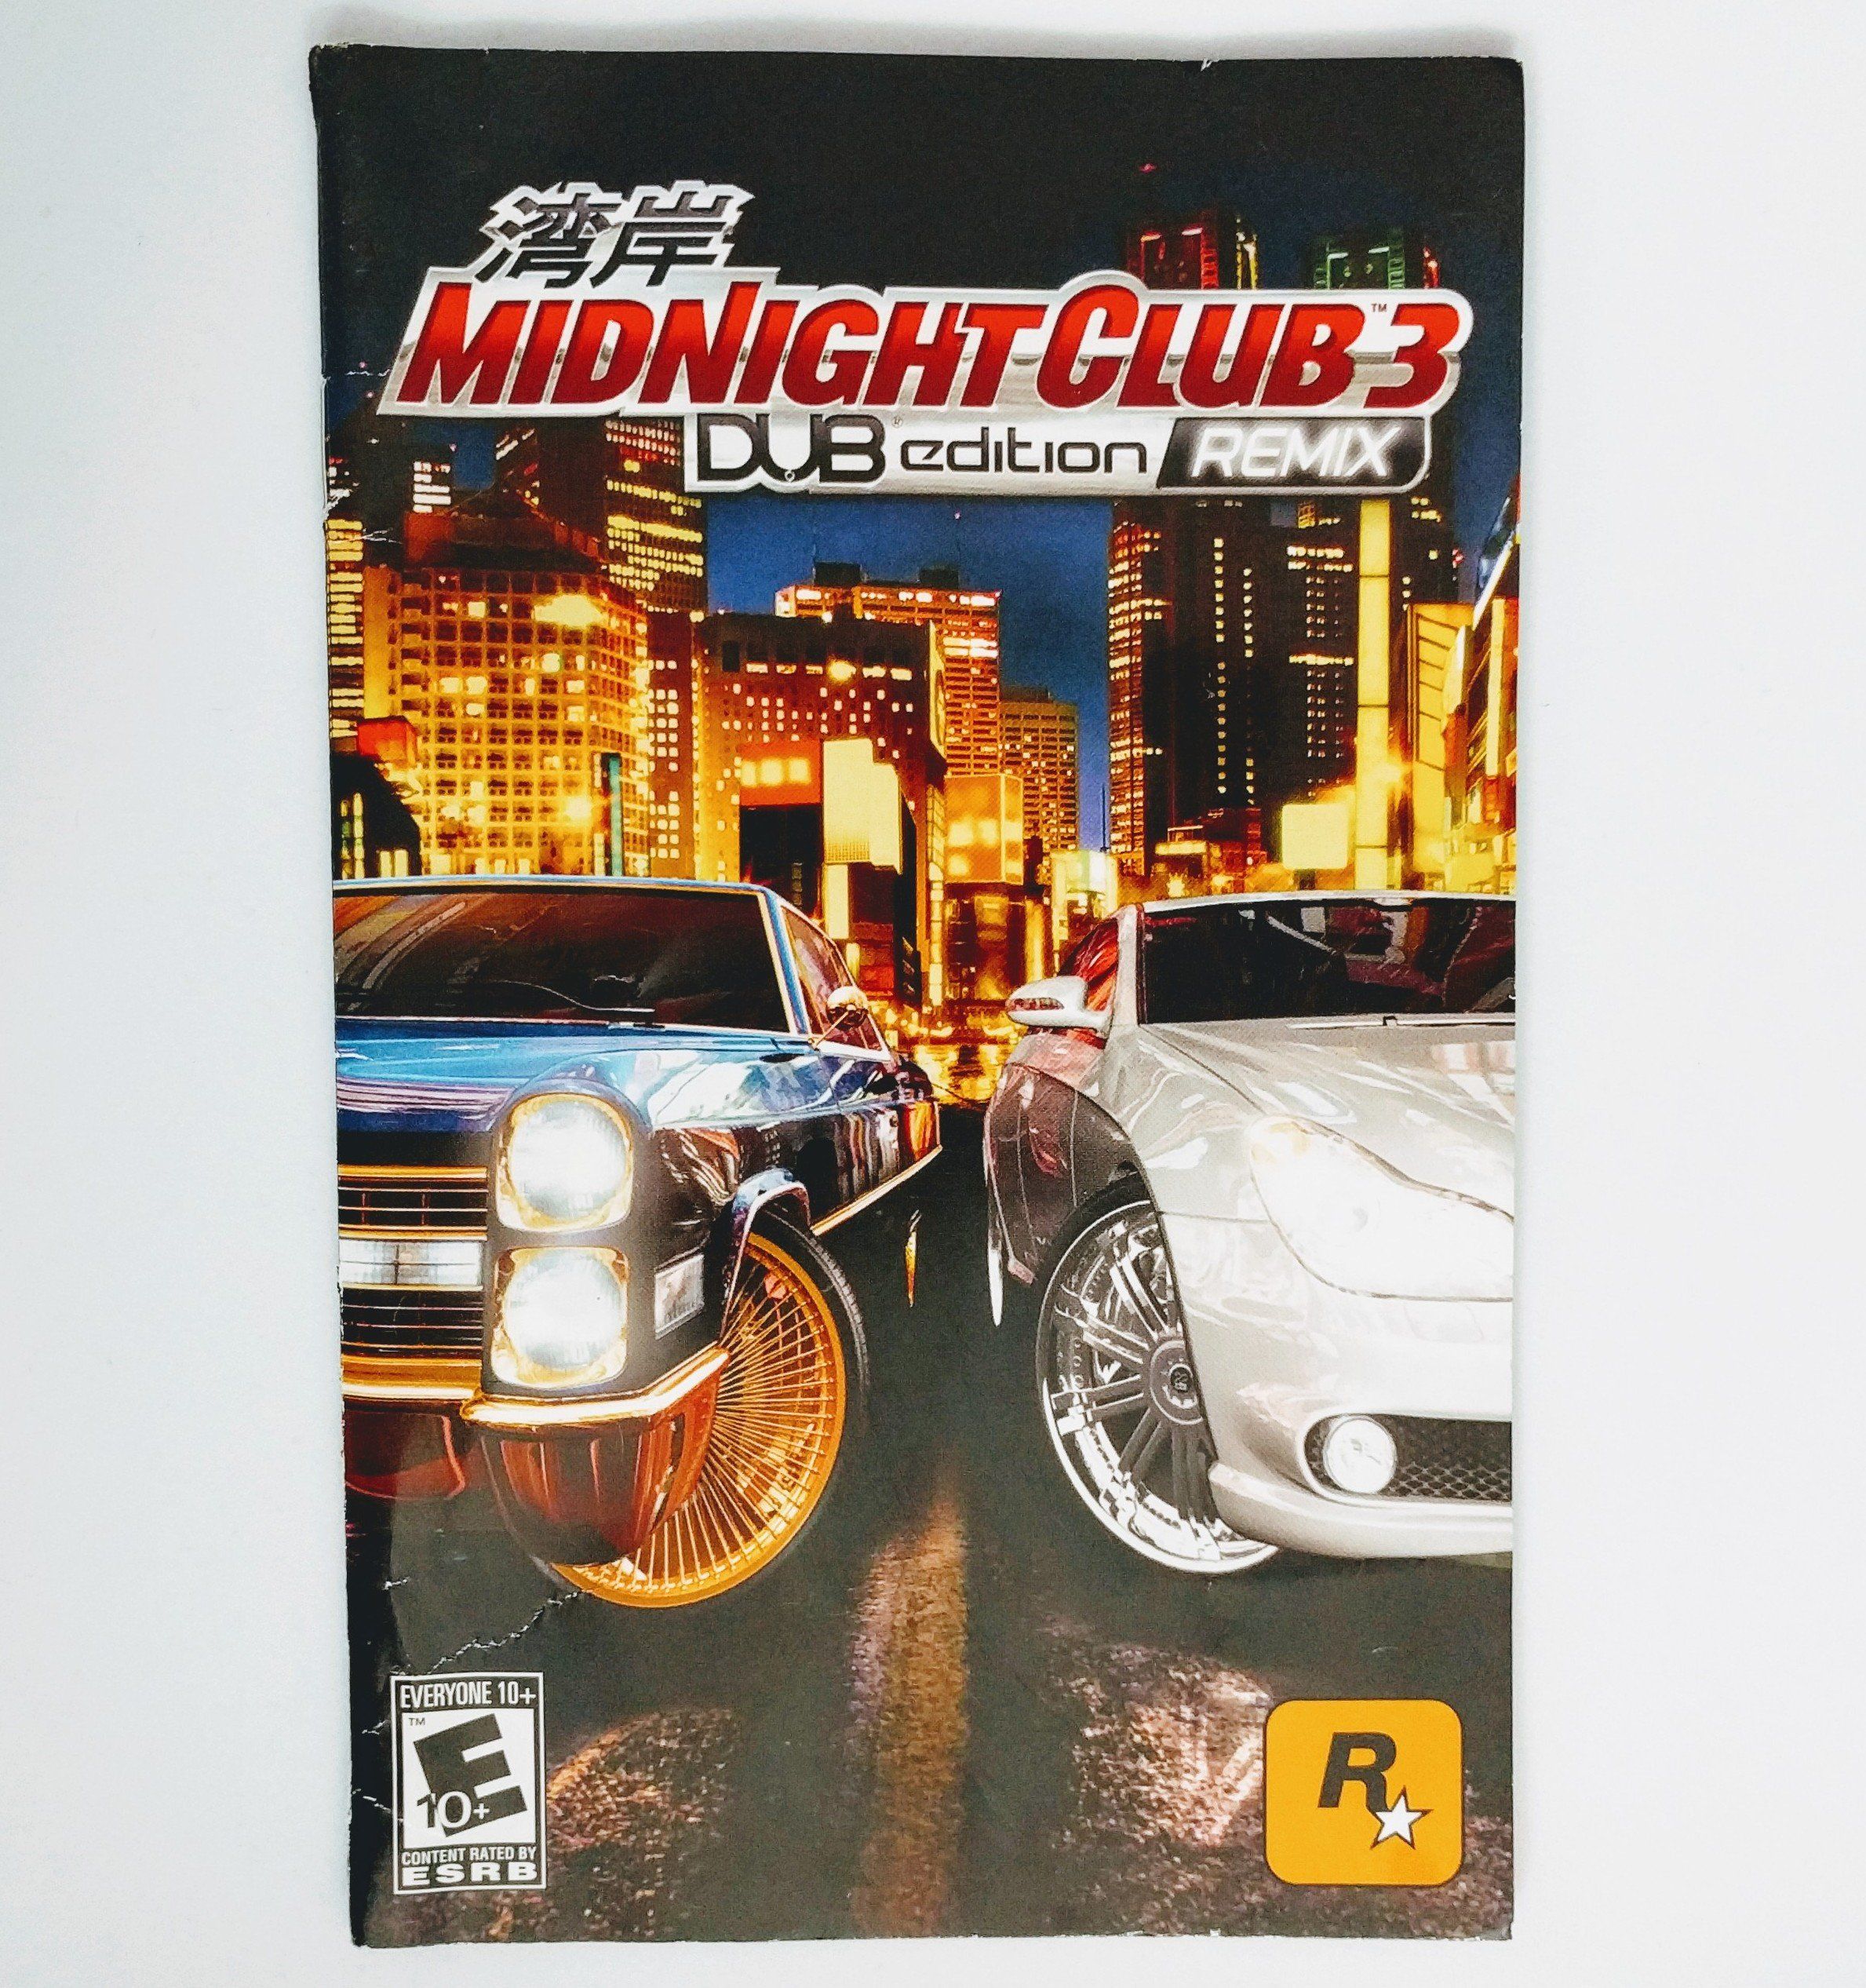 Midnight Club 3 DUB Edition REMIX PS2 Instruction Booklet (Sony PlayStation 2 Manual Only GAME) [Pamphlet only GAME INCLUDED]: Rockstar Games: Books